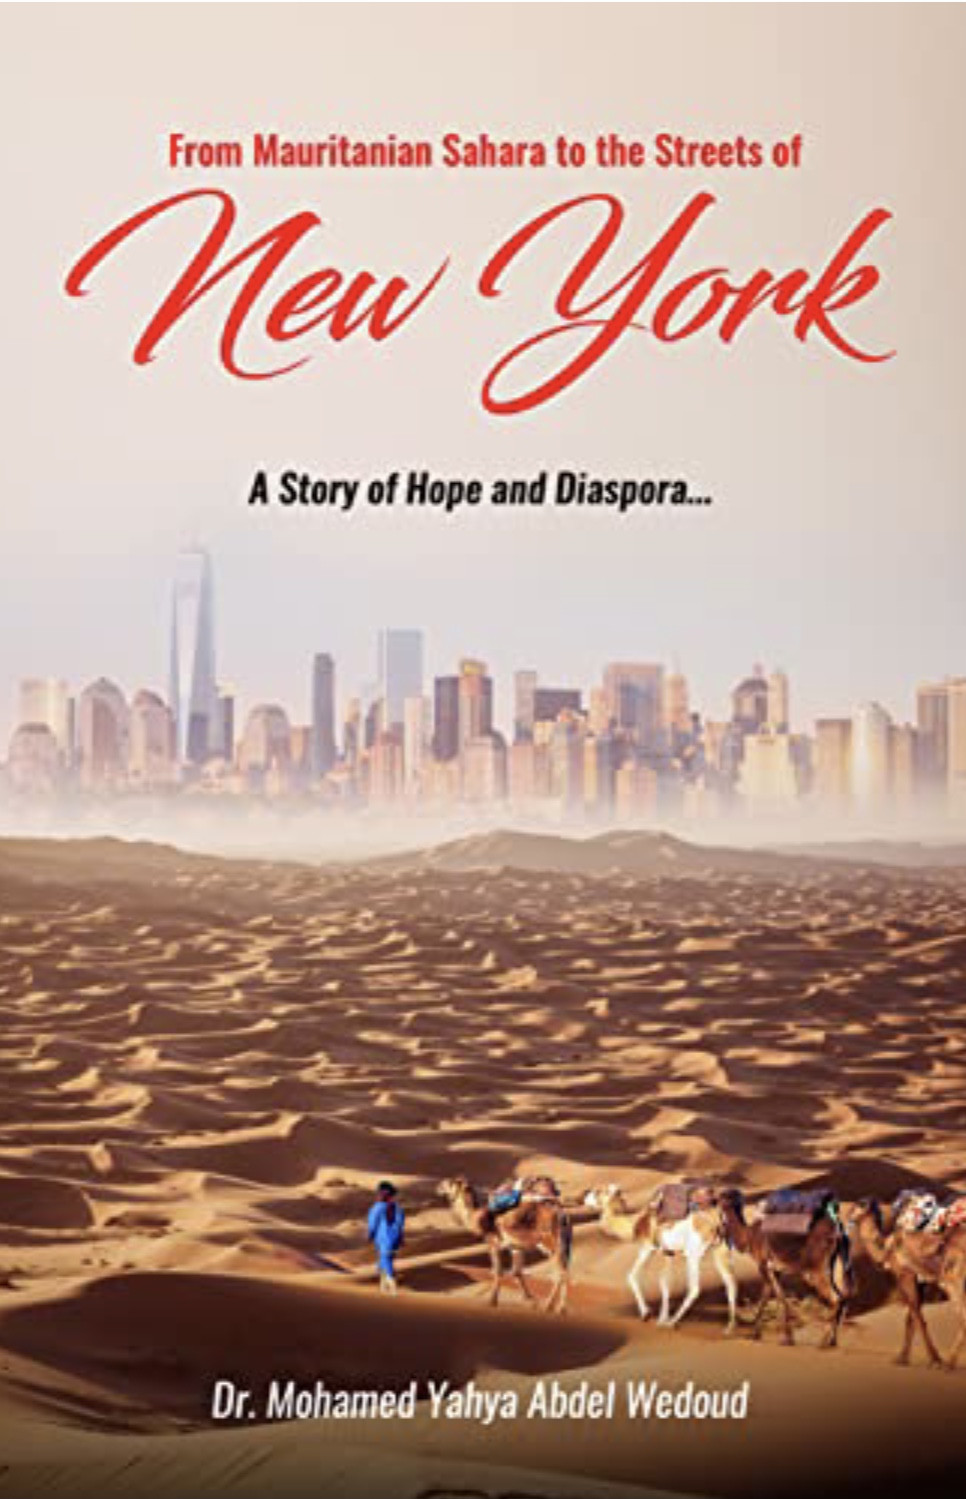 From Mauritanian Sahara to the Streets of New York